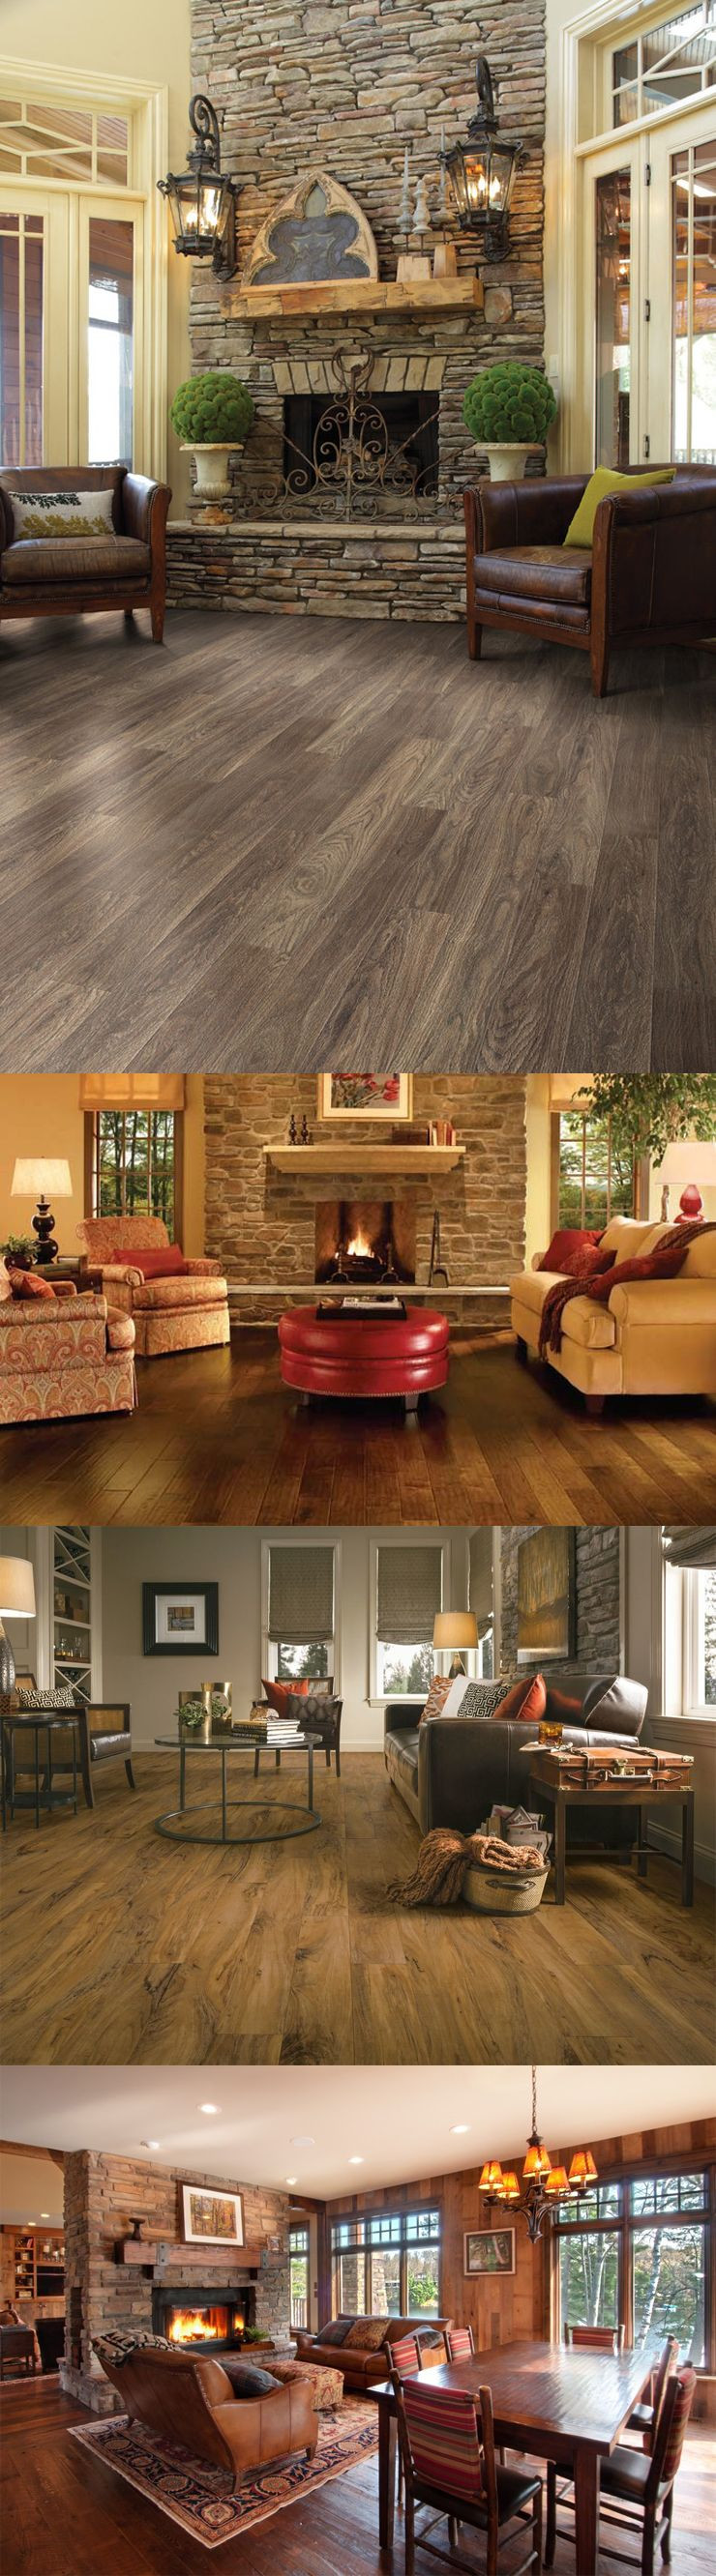 22 Fashionable Hardwood Flooring 2018 Trends 2024 free download hardwood flooring 2018 trends of vinyl flooring trends 20 hot vinyl flooring ideas 2018 plank in vinyl flooring trends 20 hot vinyl flooring ideas 2018 plank flooring ideas and wooden furnit